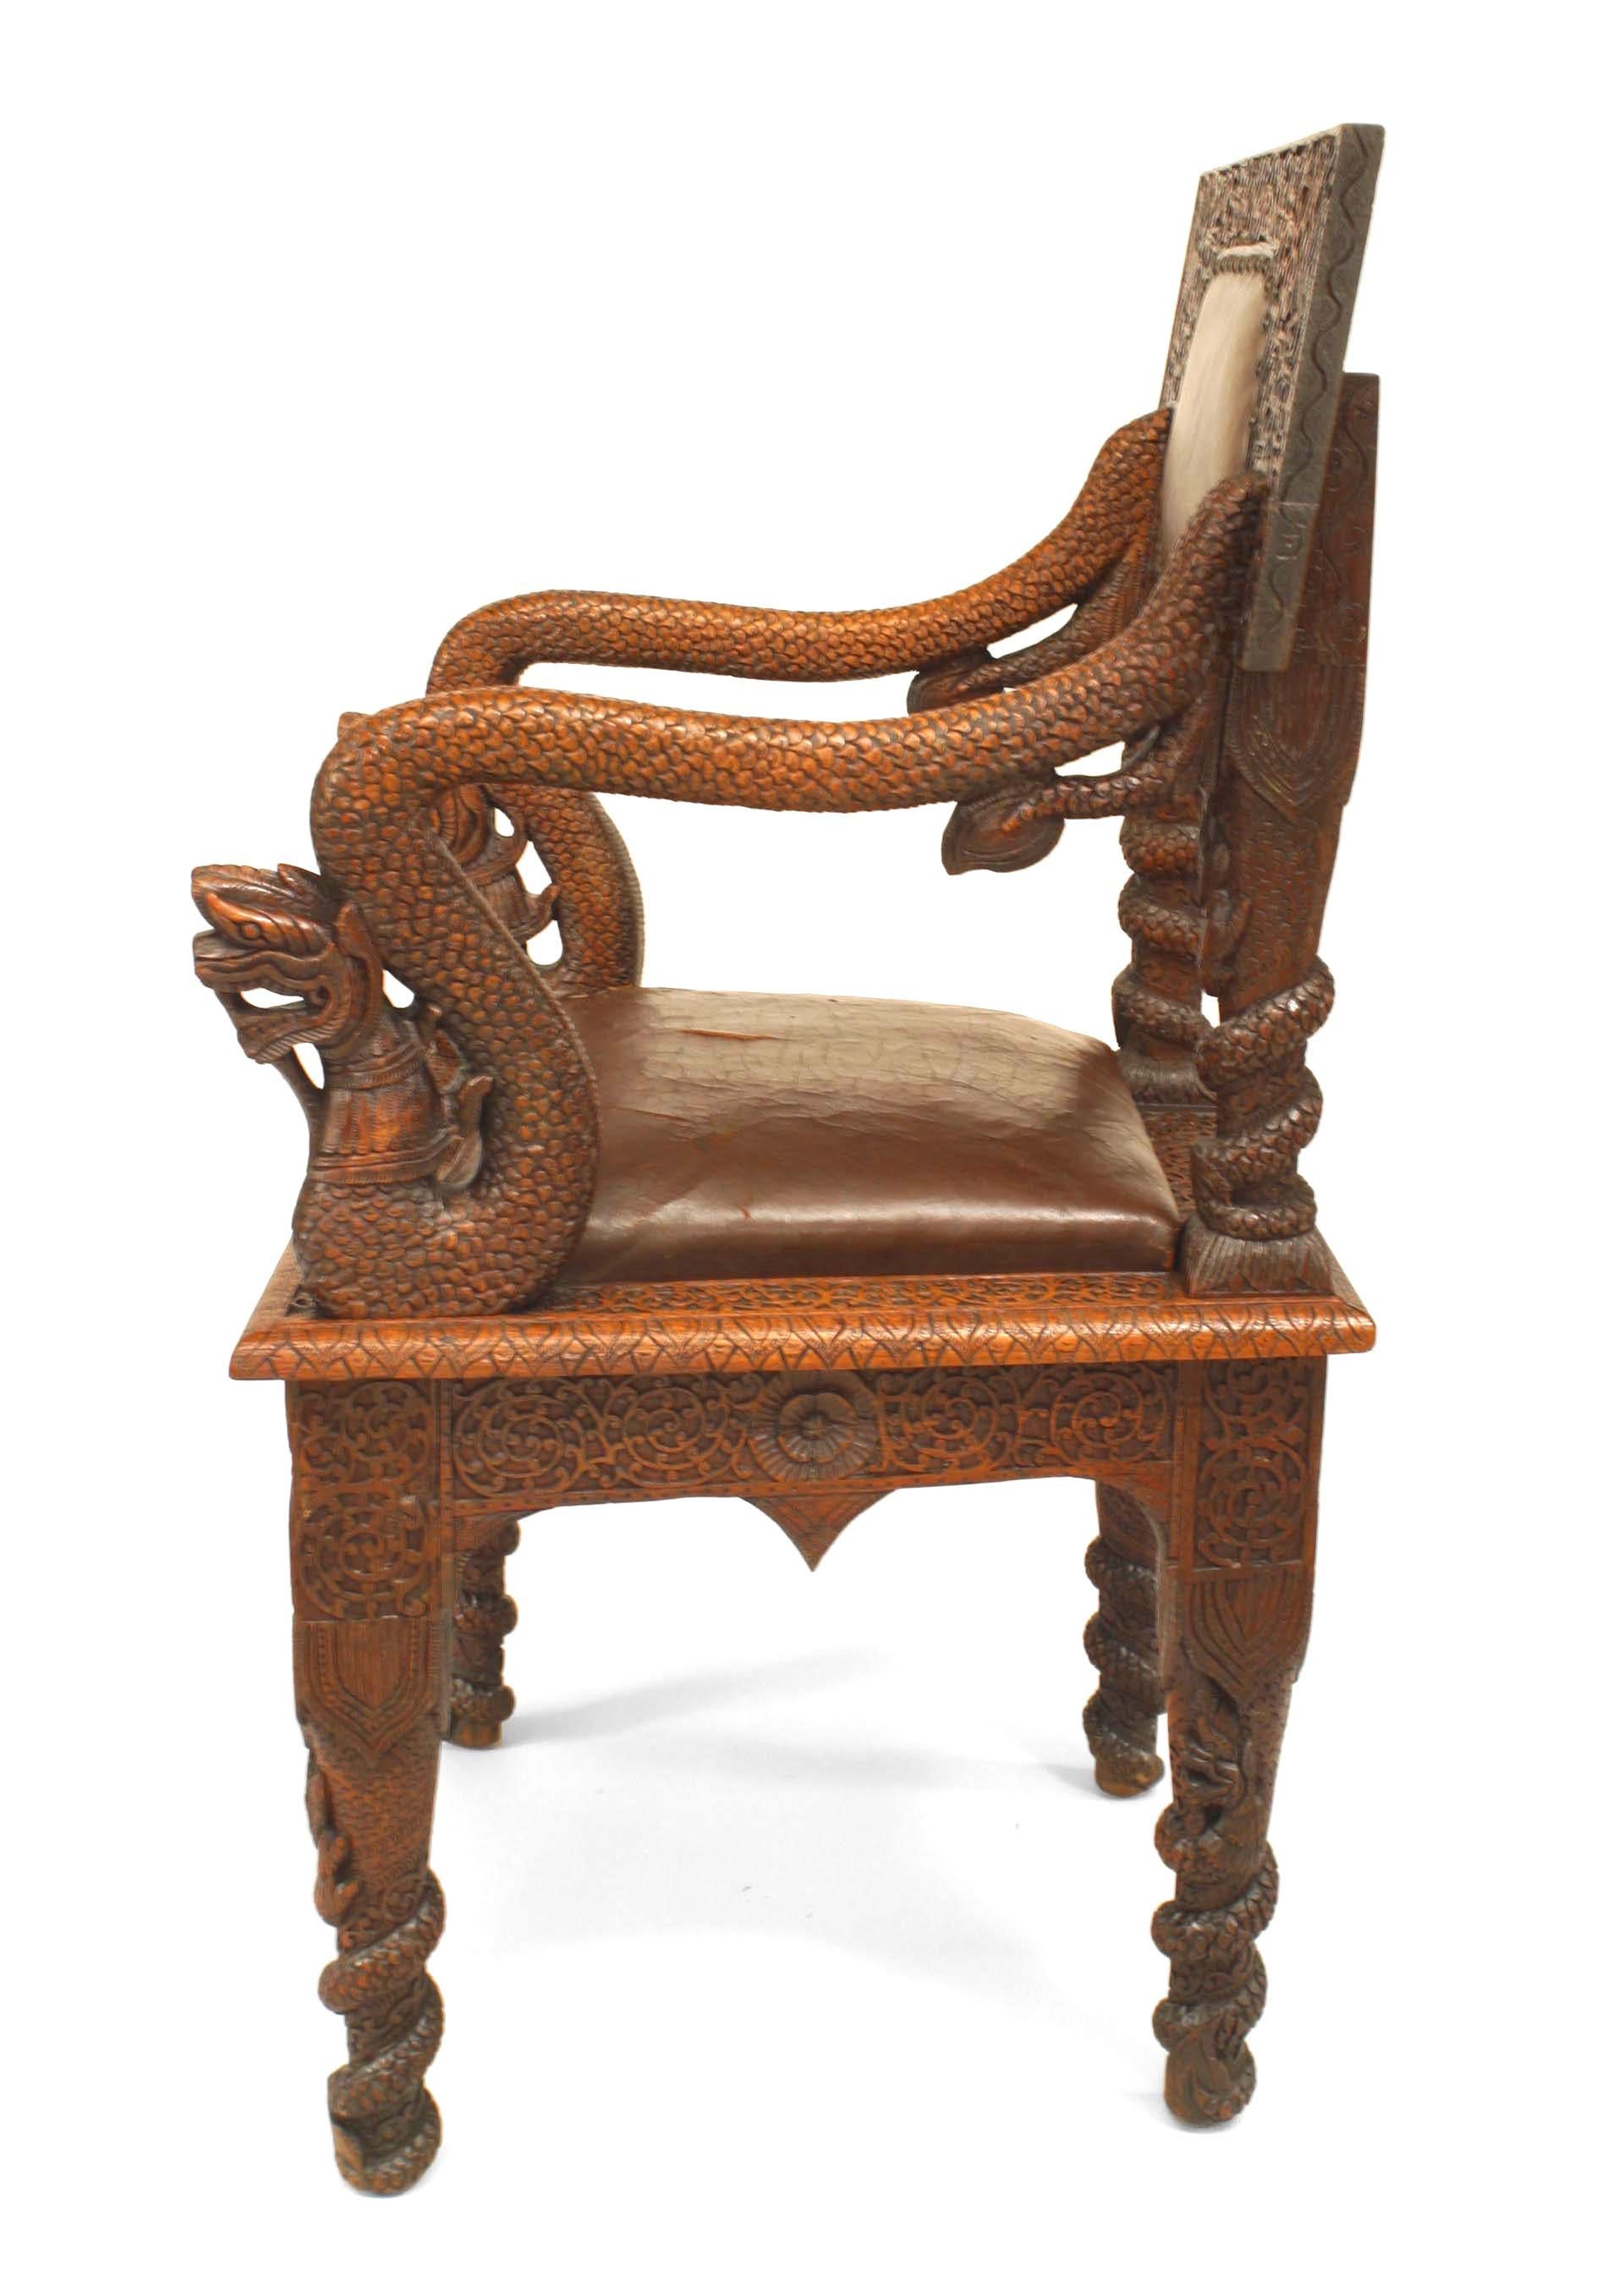 Asian Burmese-style (19th Century) carved oak armchair with decorative arms and brown leather upholstered seats and back.